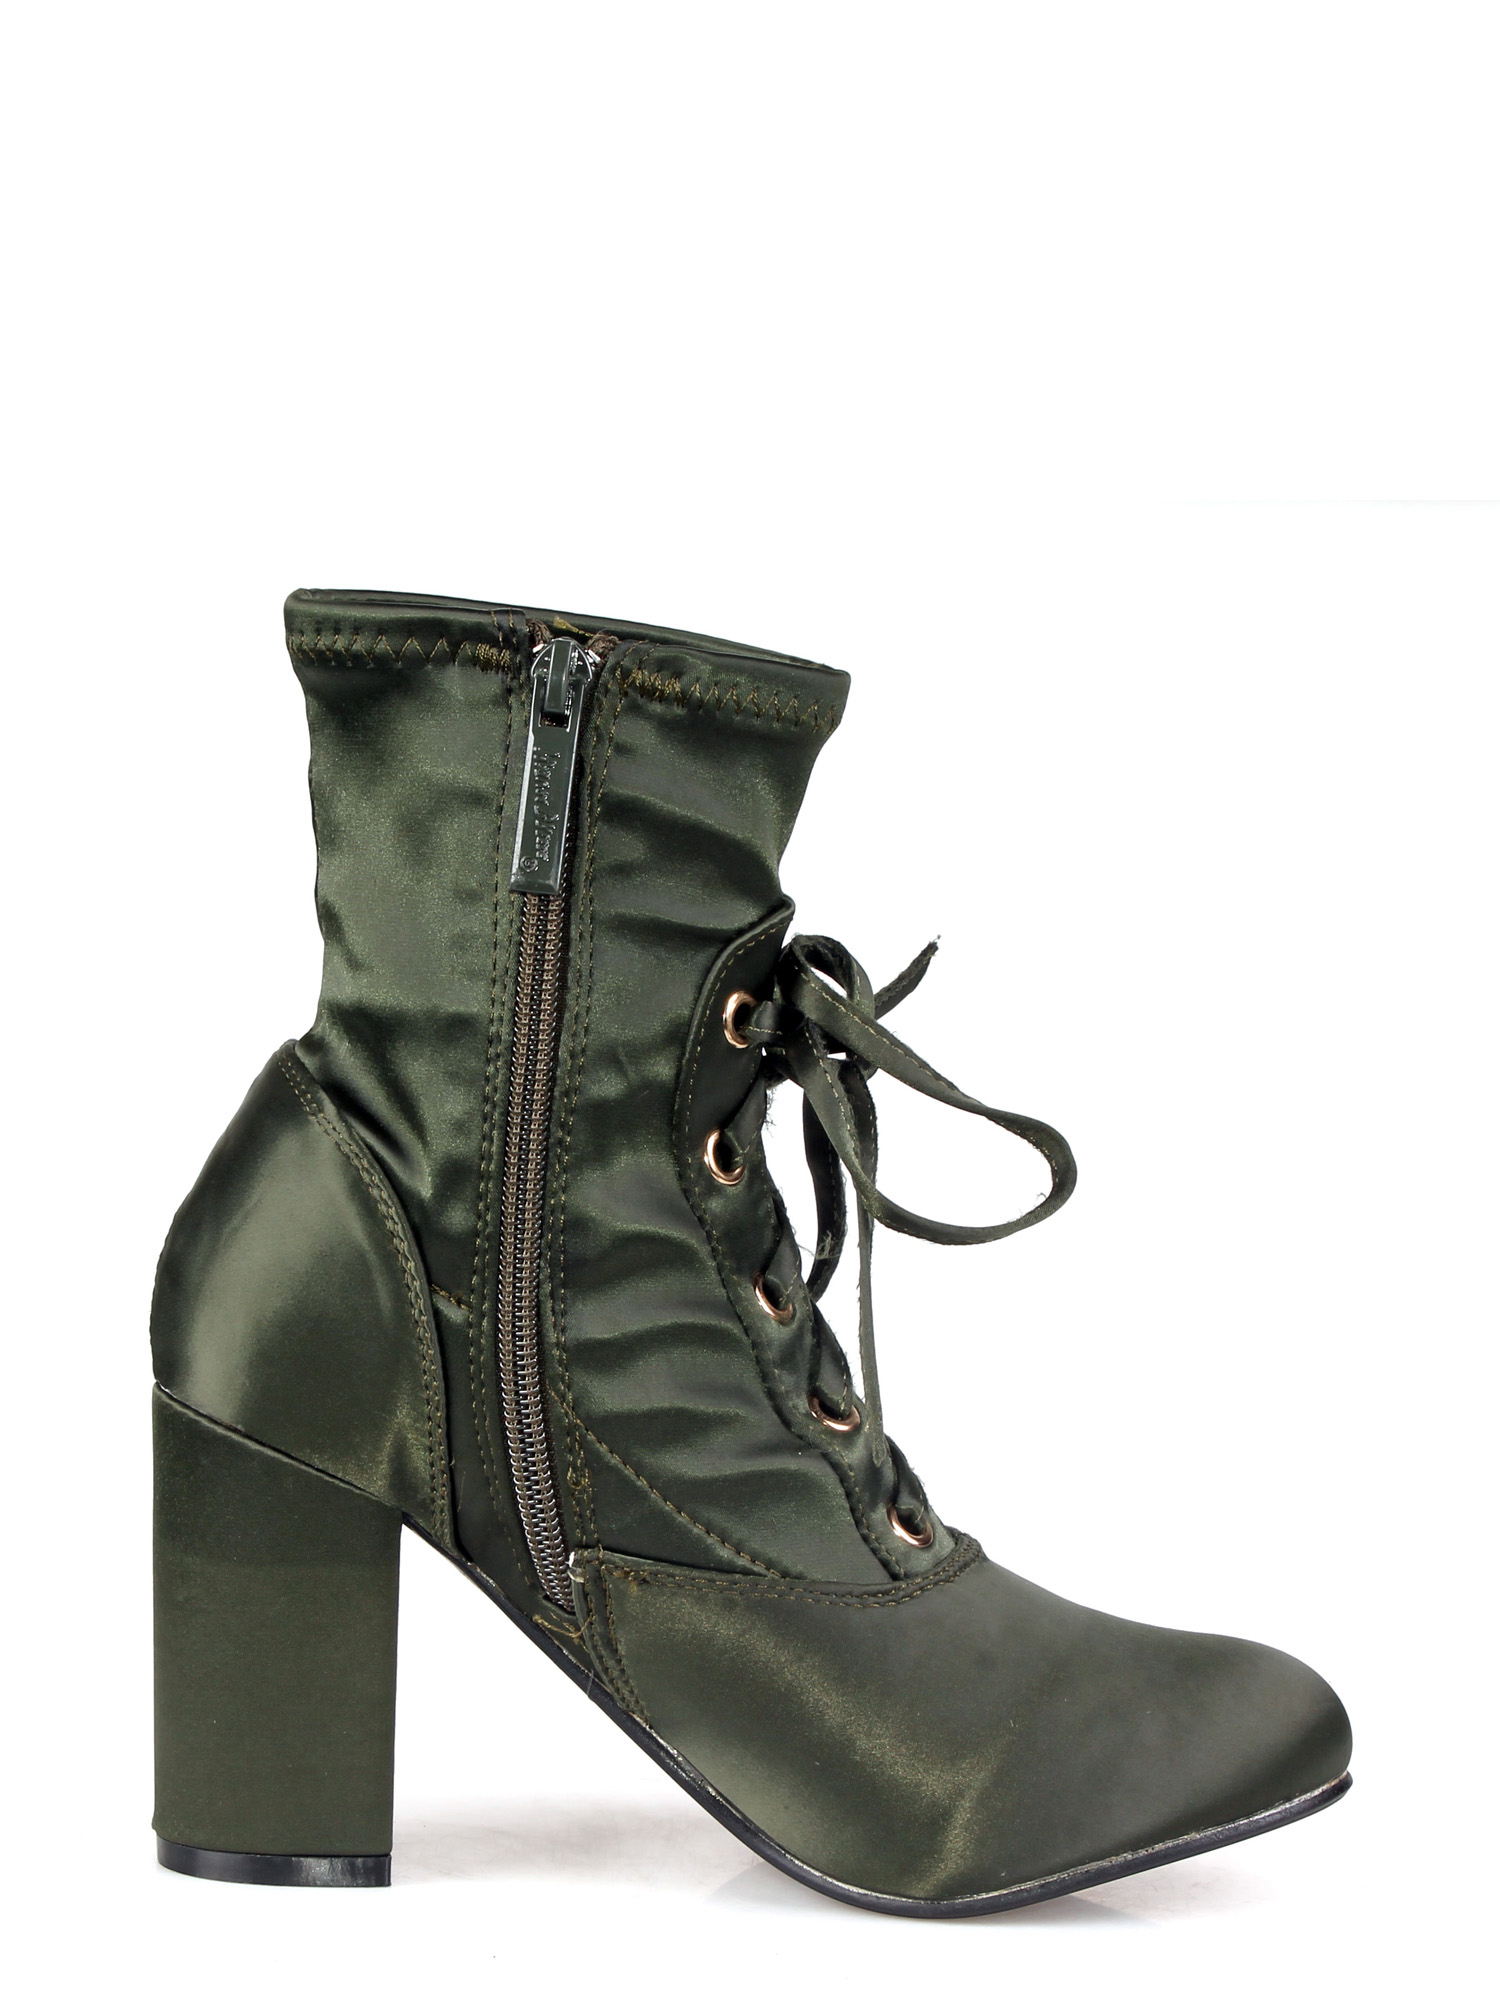 Nature Breeze Lace up Almond Toe Chunk Heel Women's Anke Boots in Olive - image 3 of 4